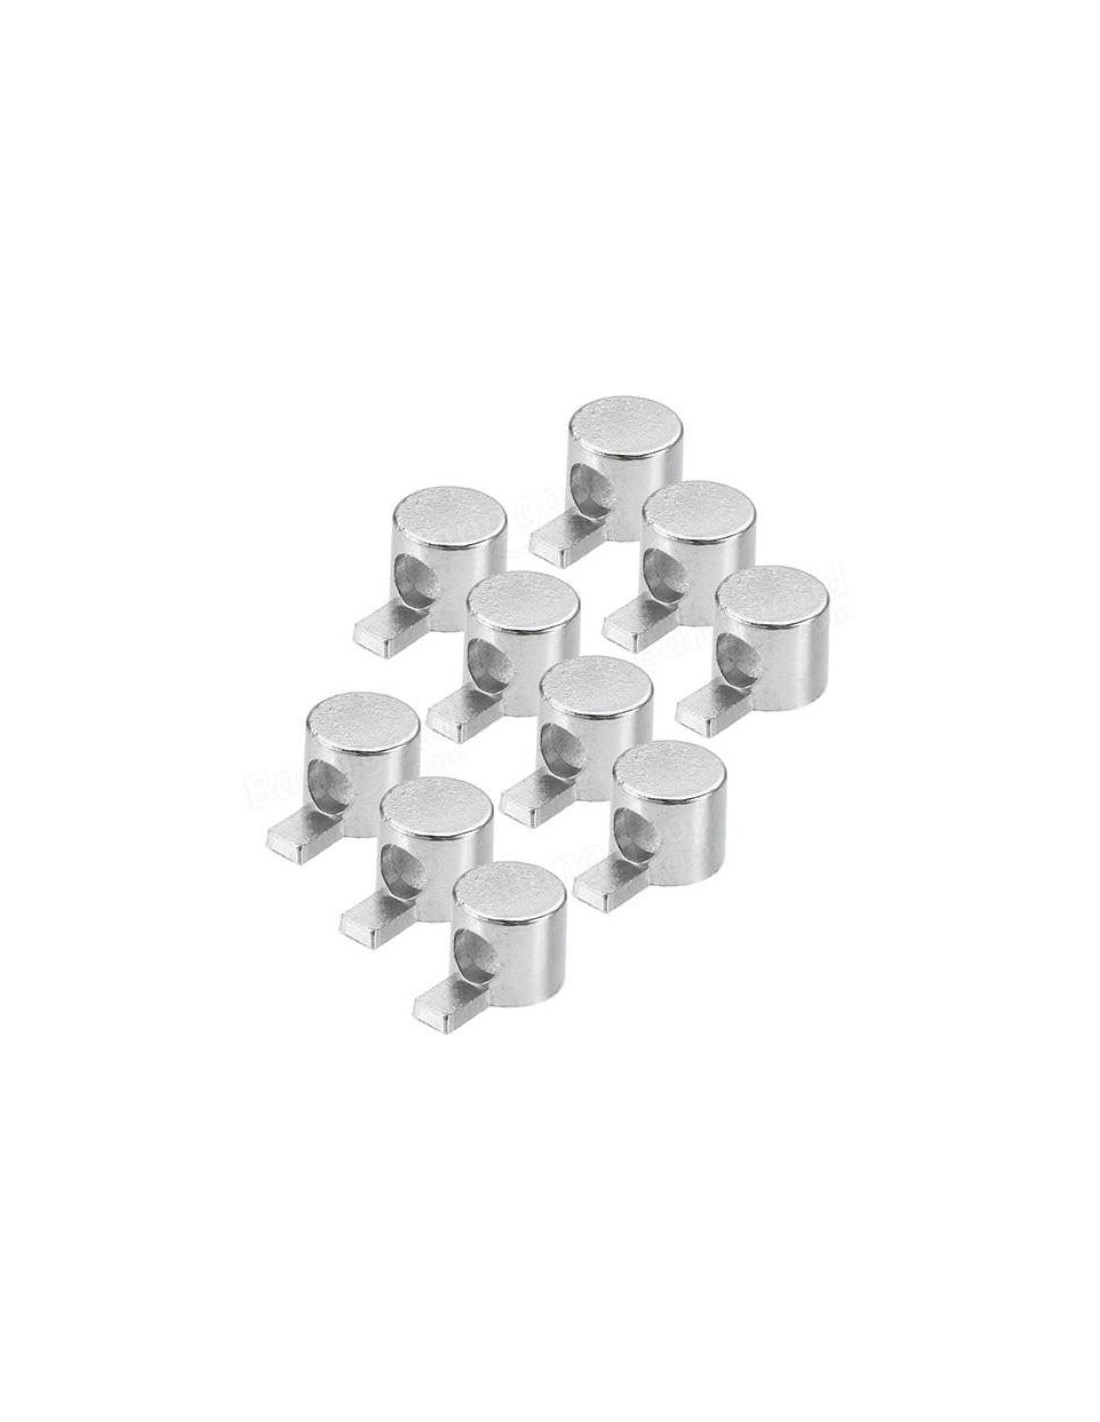 Inner connector 20x20 for profile, 10 pcs.